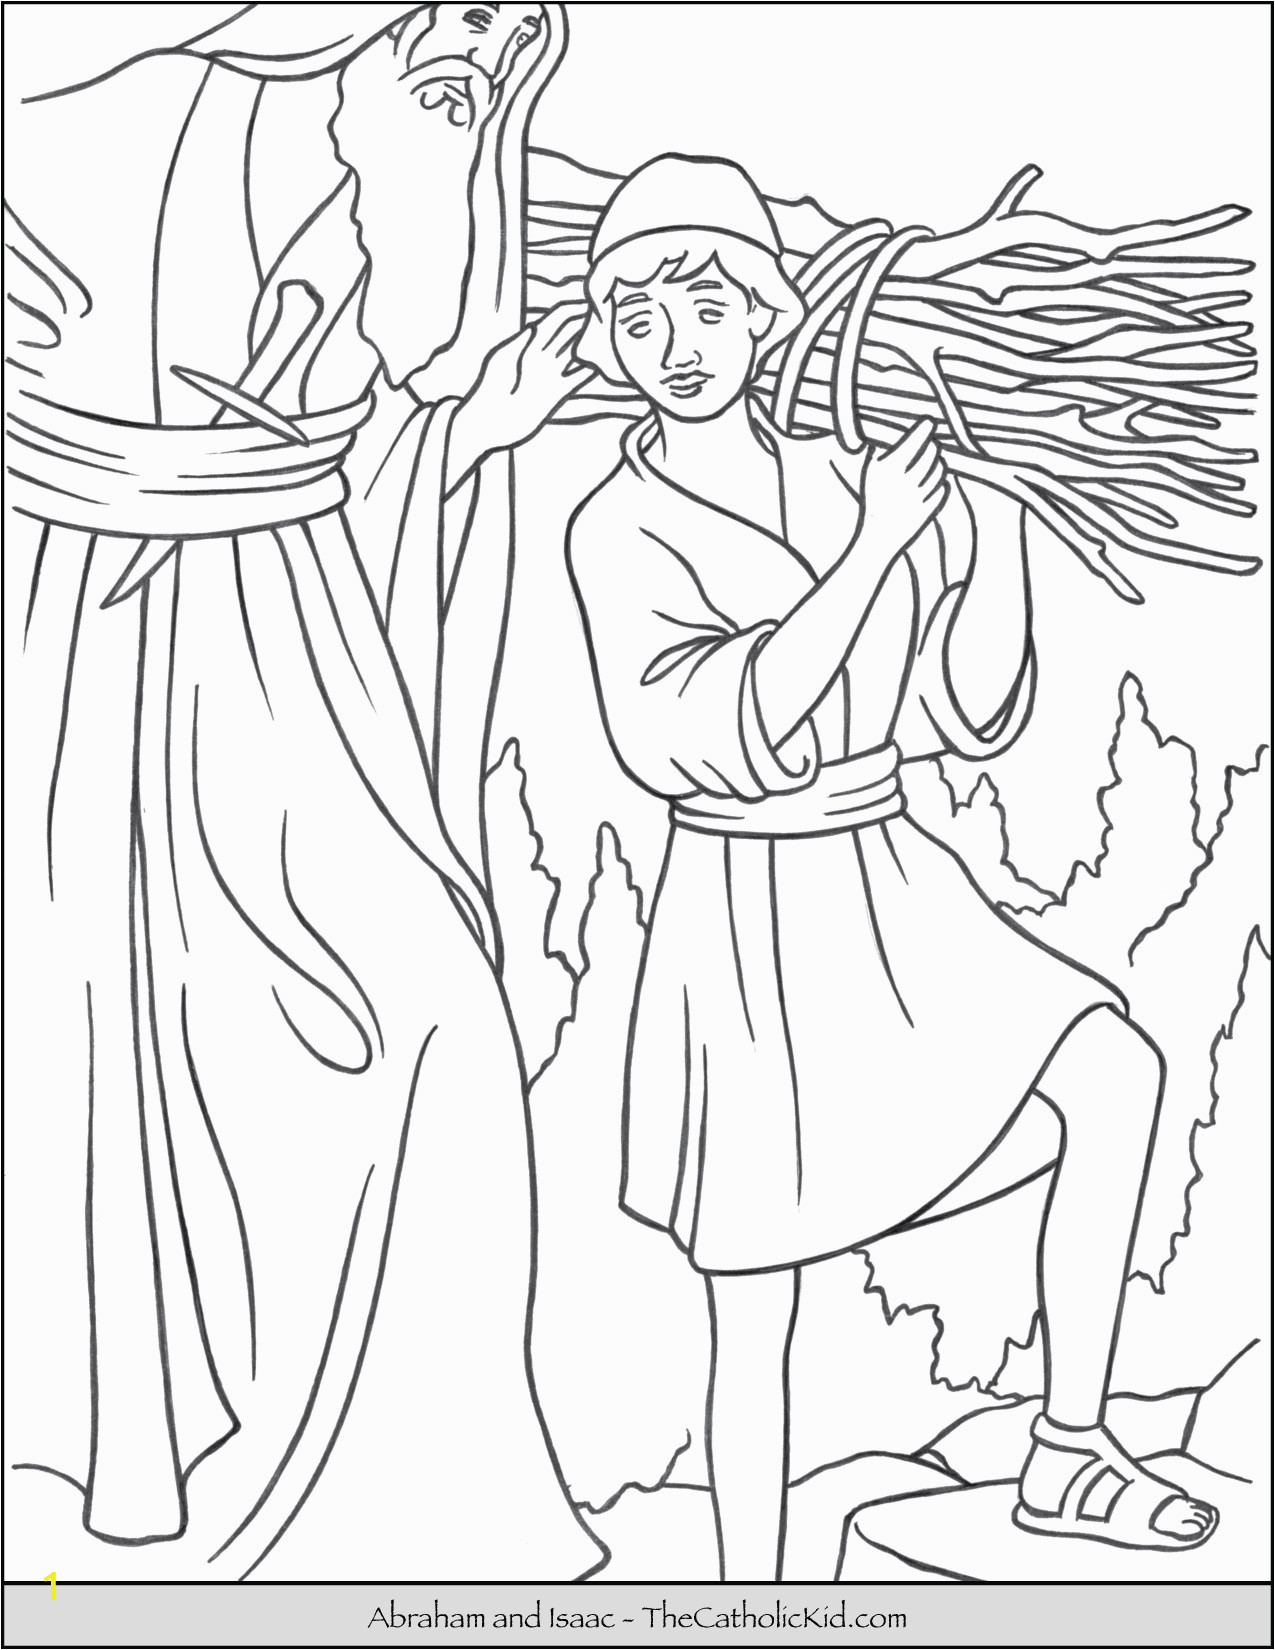 Abraham and isaac Coloring Pages Free Abraham and isaac Coloring Page thecatholickid